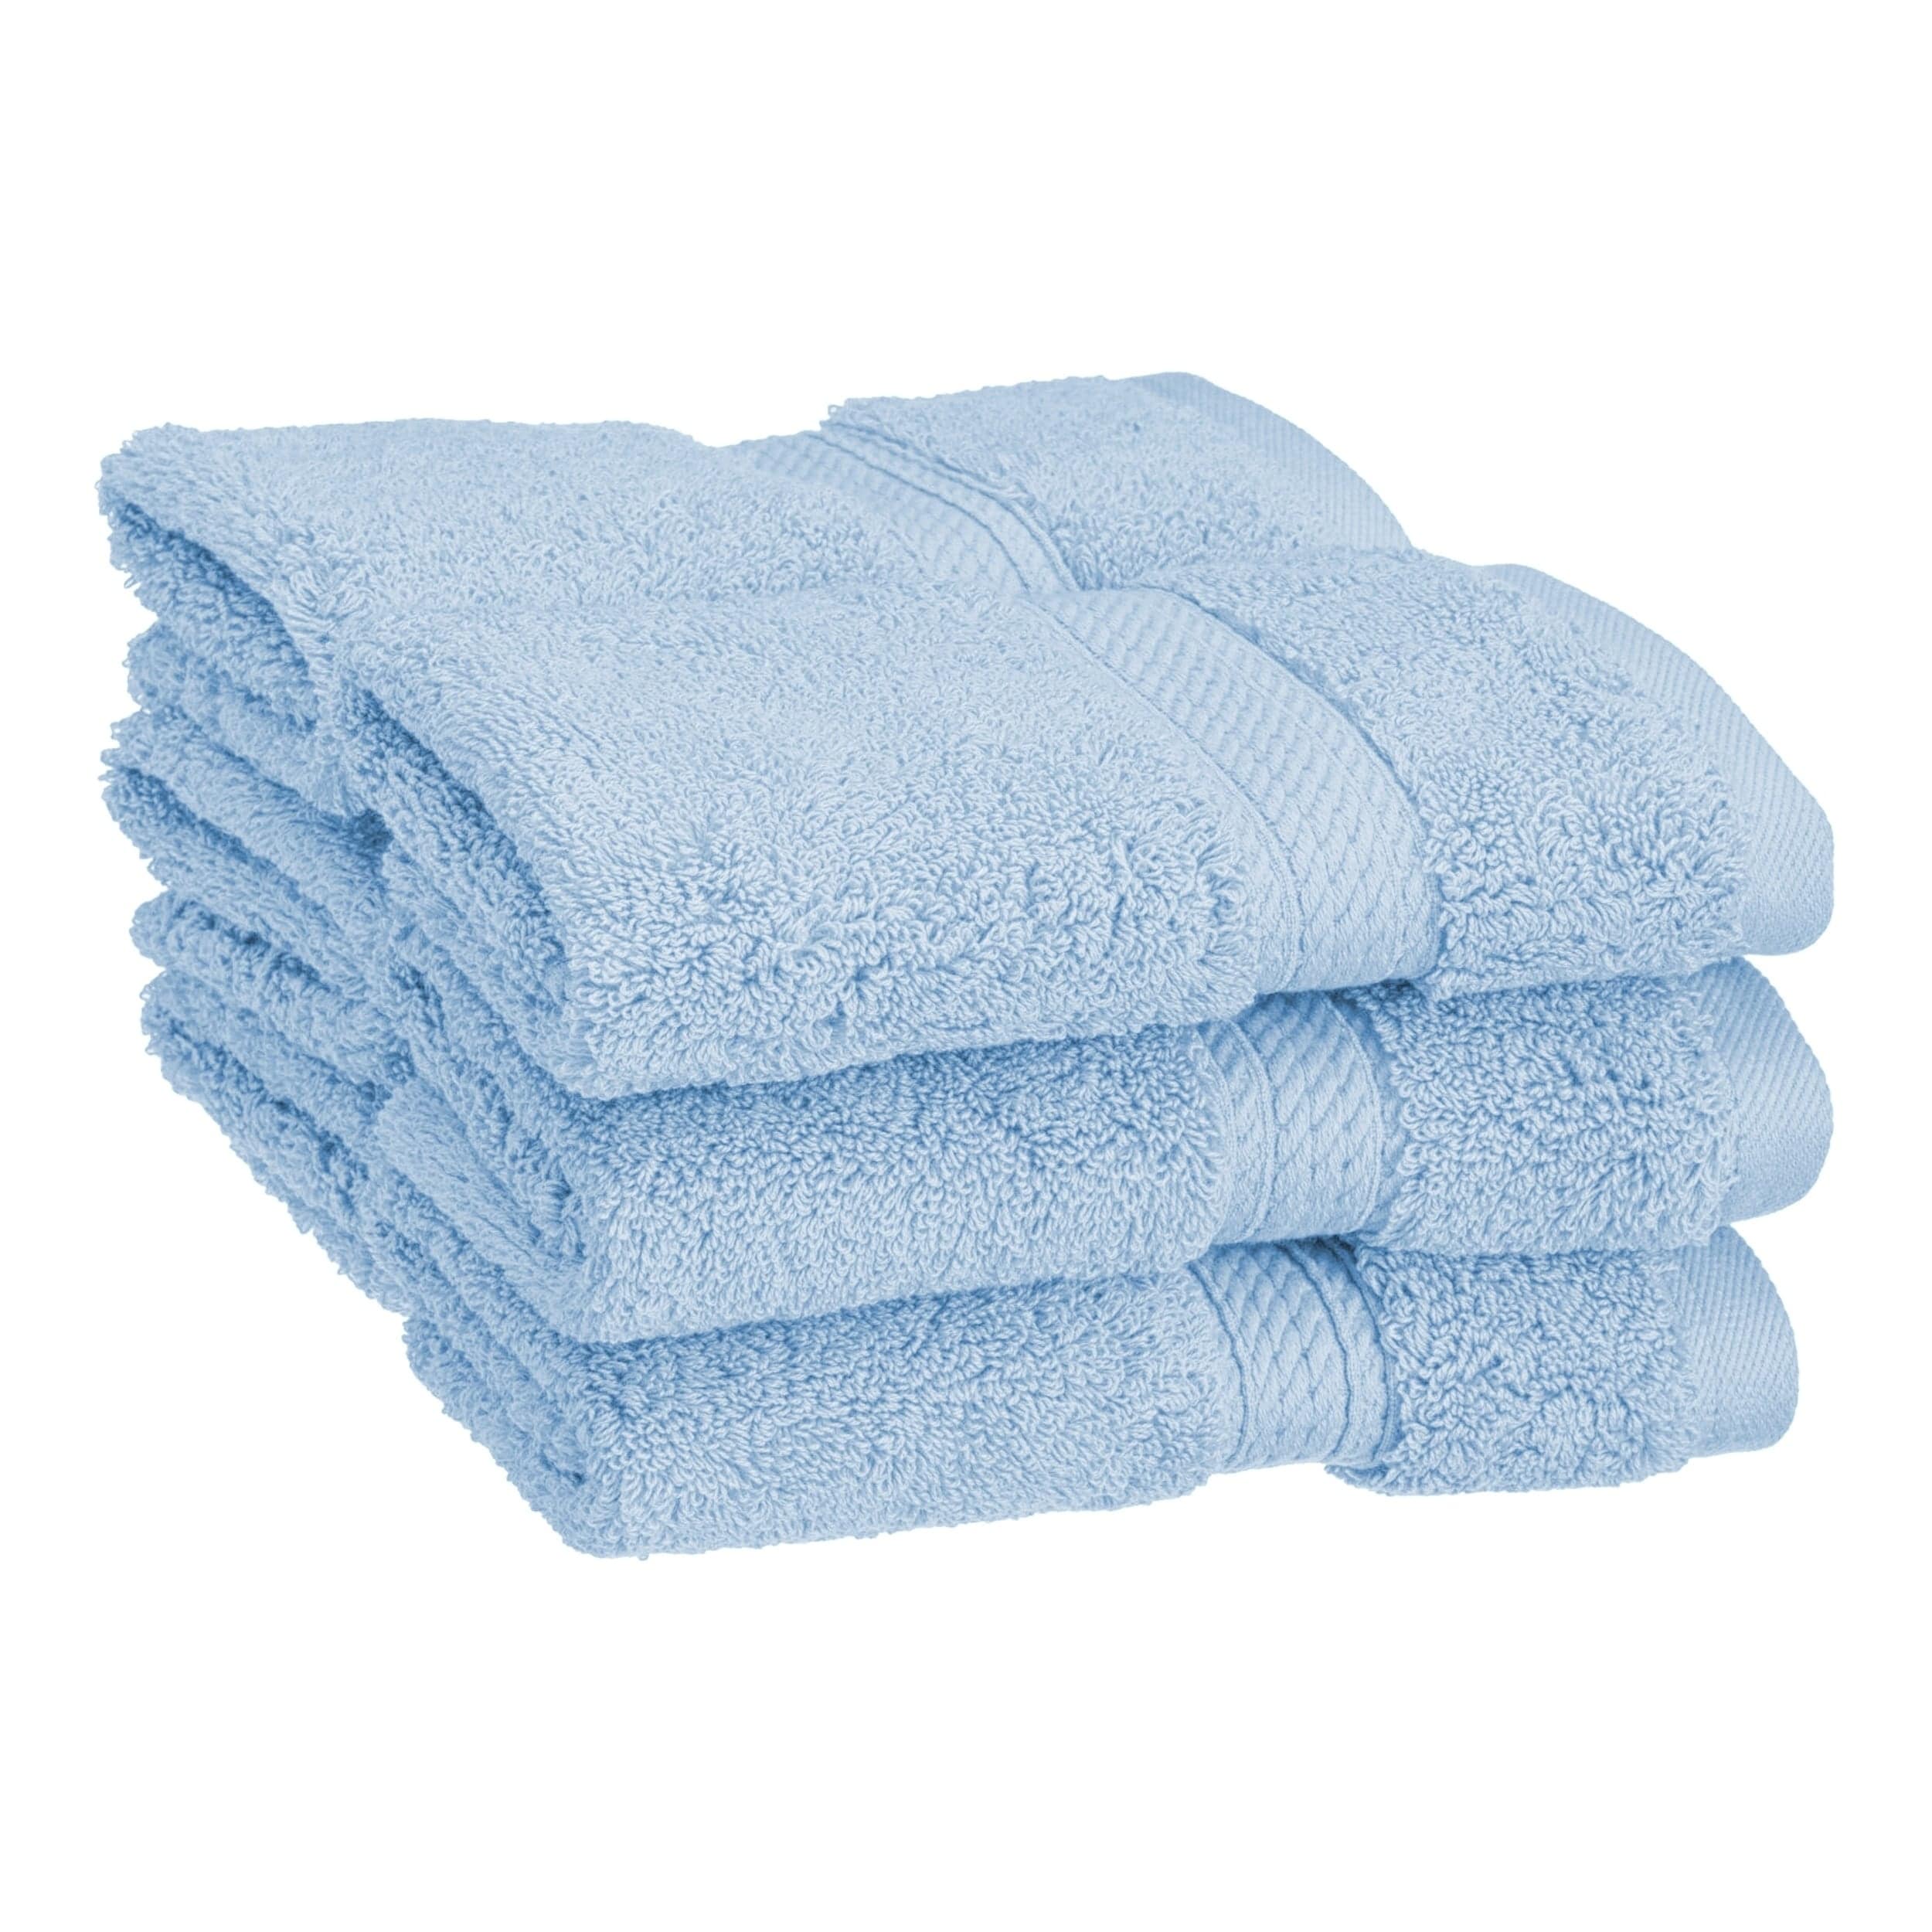 Light weight Quick Dry Soft Wash Cloths for Bathroom Hotel Spa Kitchen Face Towel set Westlane Linens Economy Washcloths Set 100/% Cotton Flannels Face Cloth Pack of 24-30x30 cm